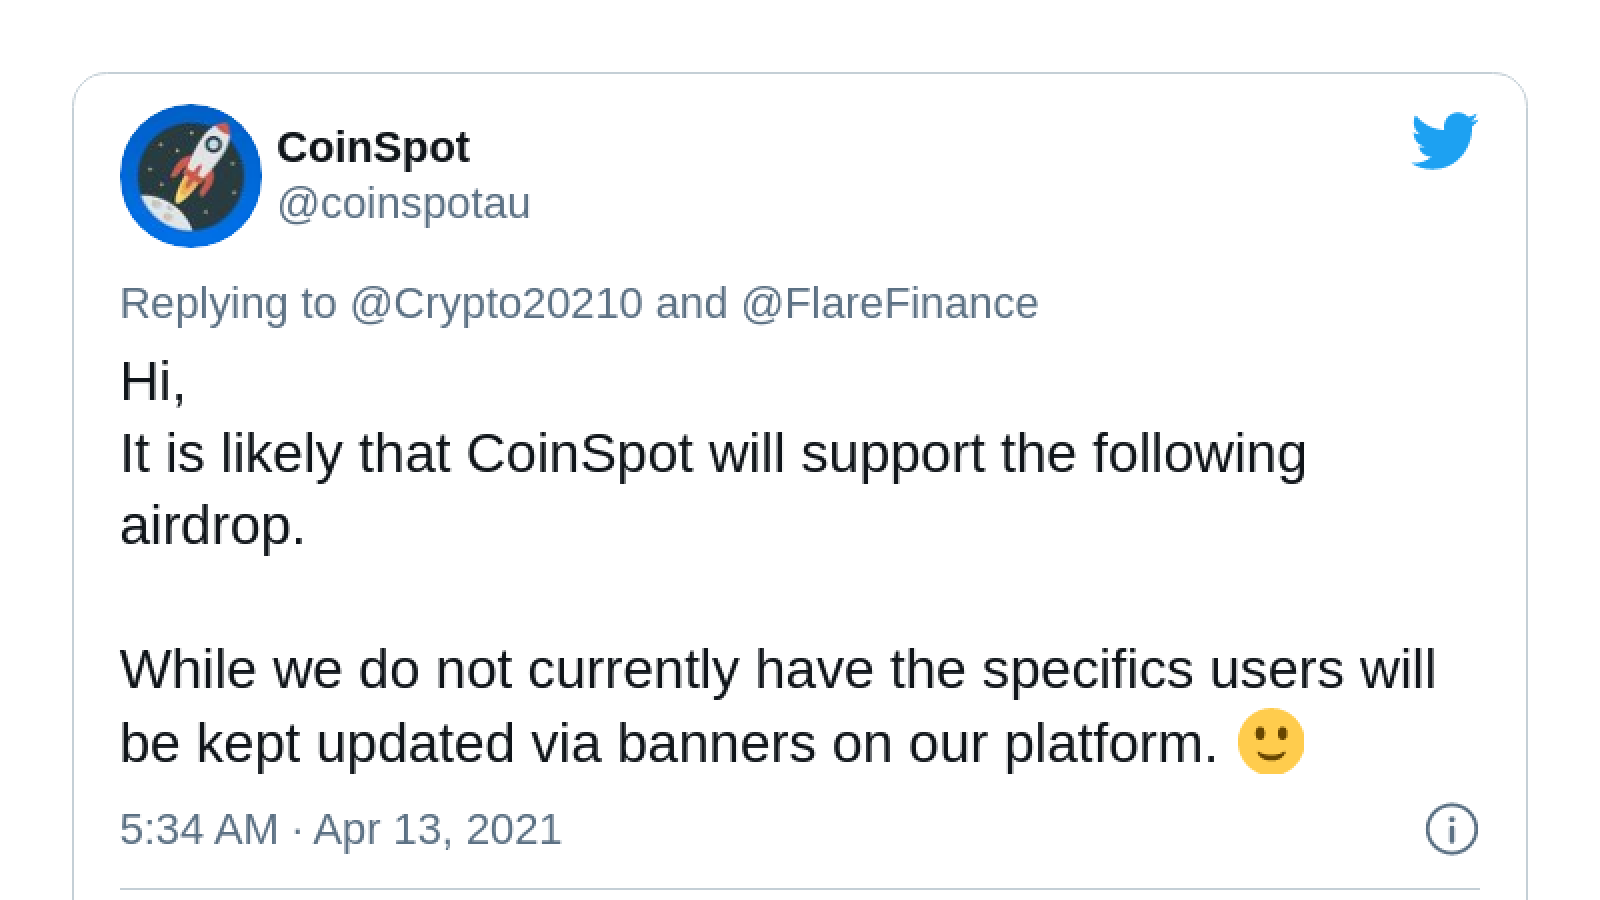 Flare Finance sirdrop will be supported by Coinspot